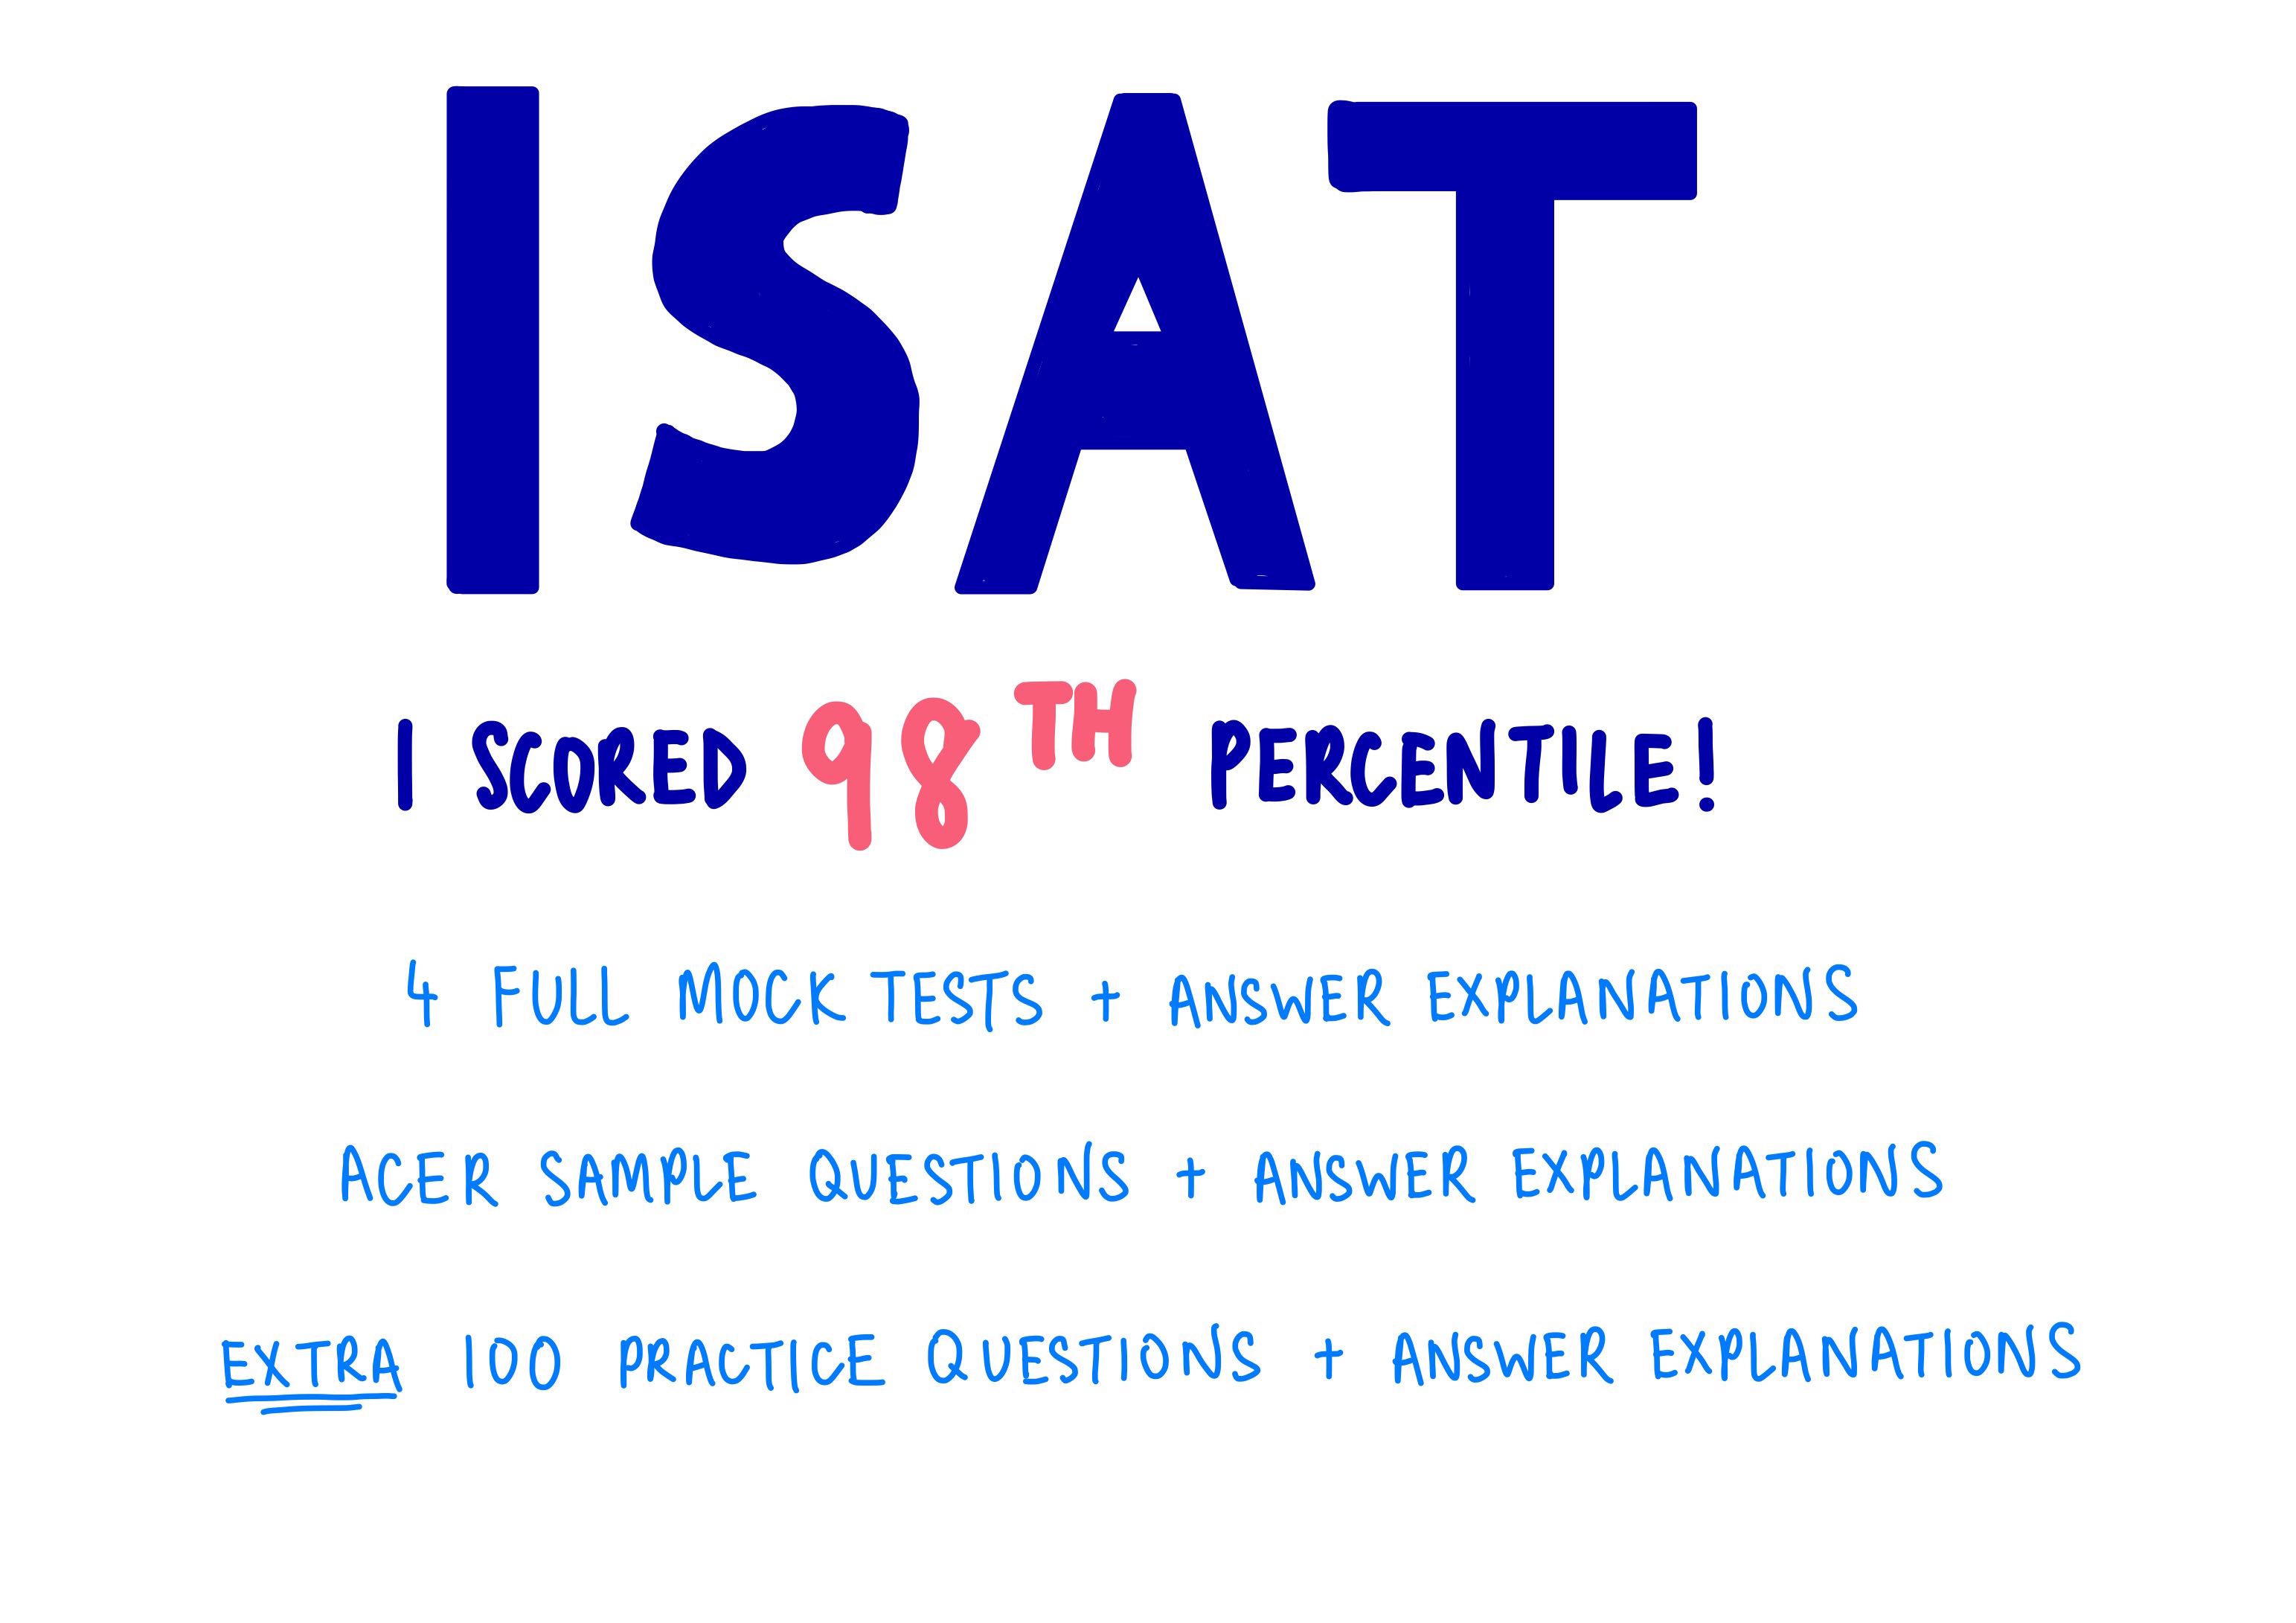 isat-preparation-materials-questions-tests-practices-books-stationery-textbooks-tertiary-on